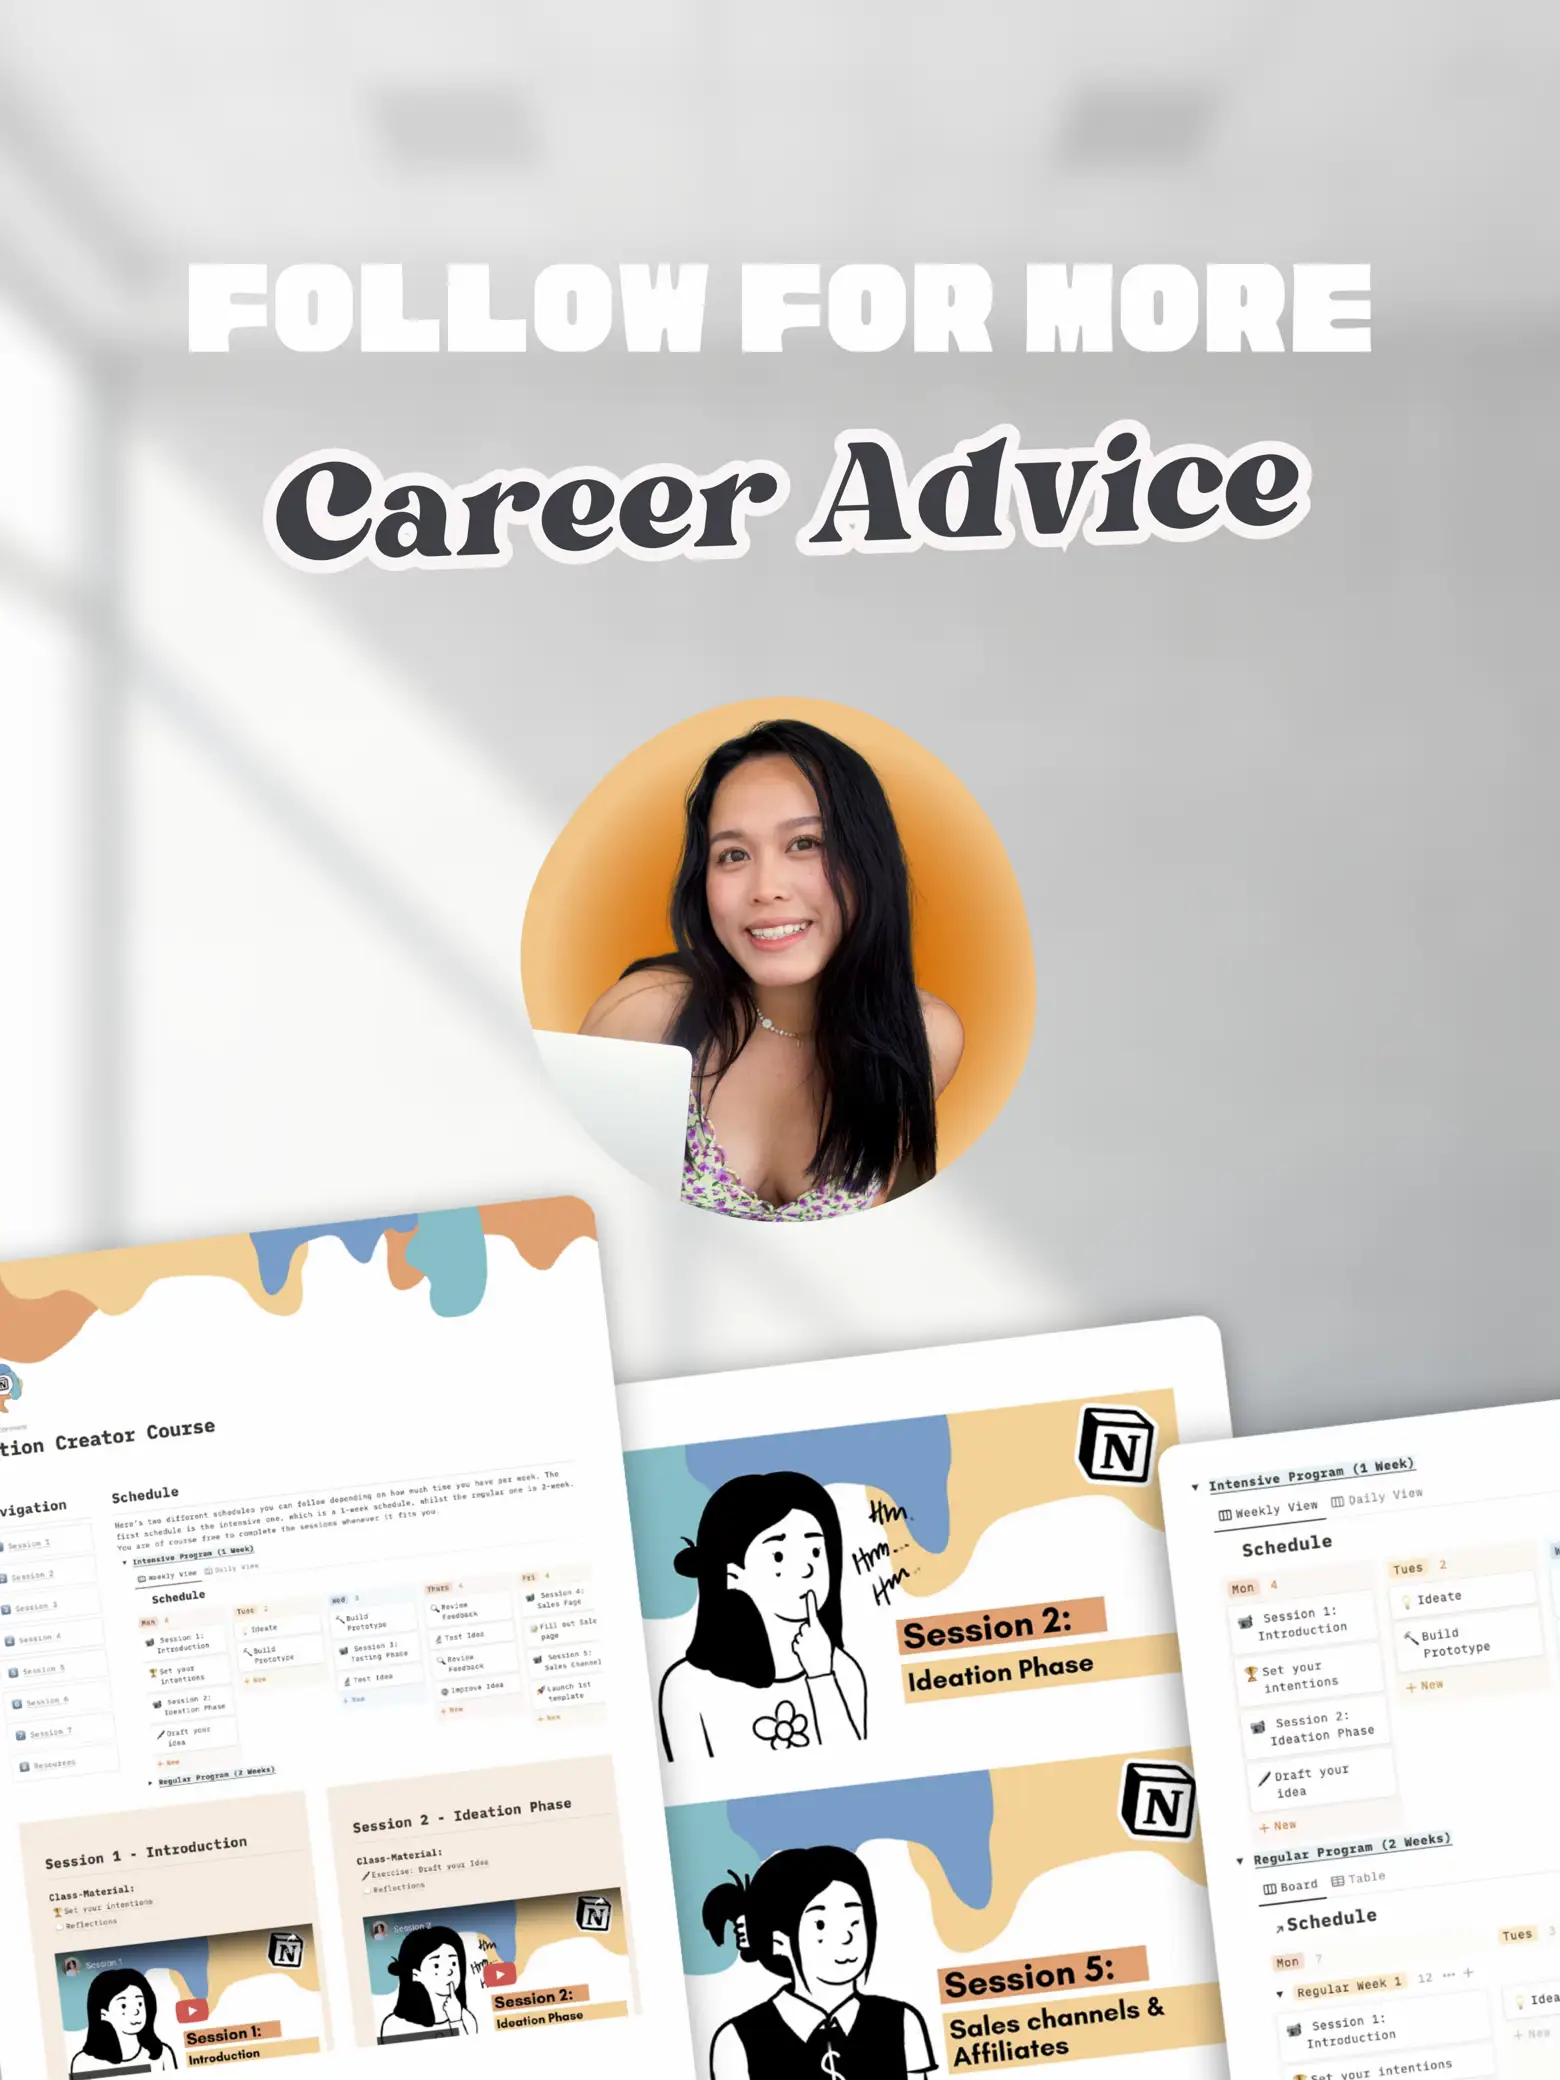 , A woman is smiling and posing for a picture. She is standing in front of a board with a schedule and a sign that says "Follow for more career advice".